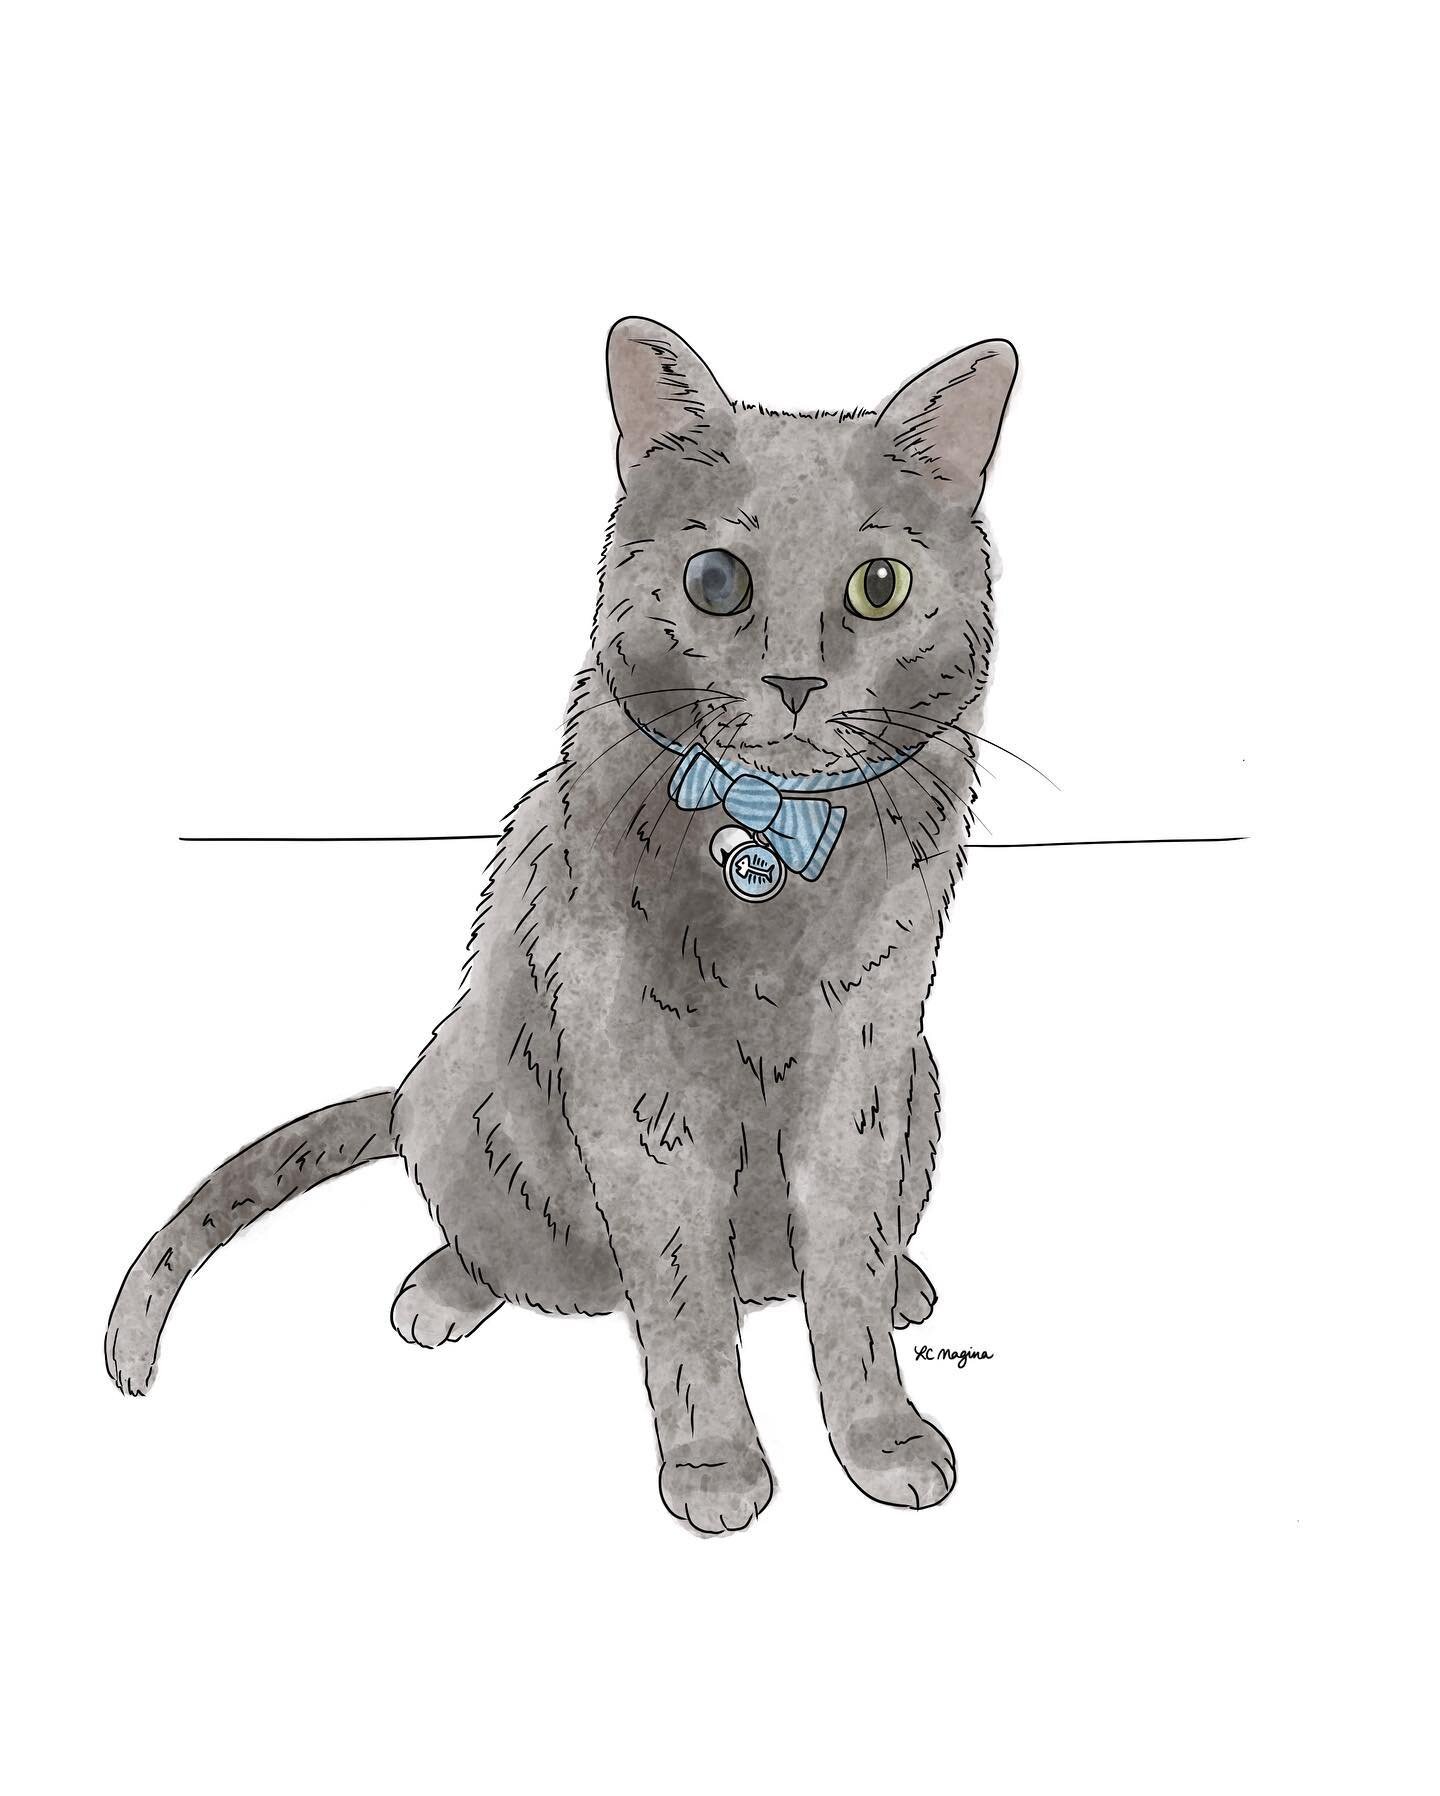 Probably time I doodled our sweet baby boy! We foster failed this guy a year and a half ago after @monikatheplant found him. He was super sick and had a bad eye infection that has left scarring on one of his eyes. We think he is absolutely perfect an